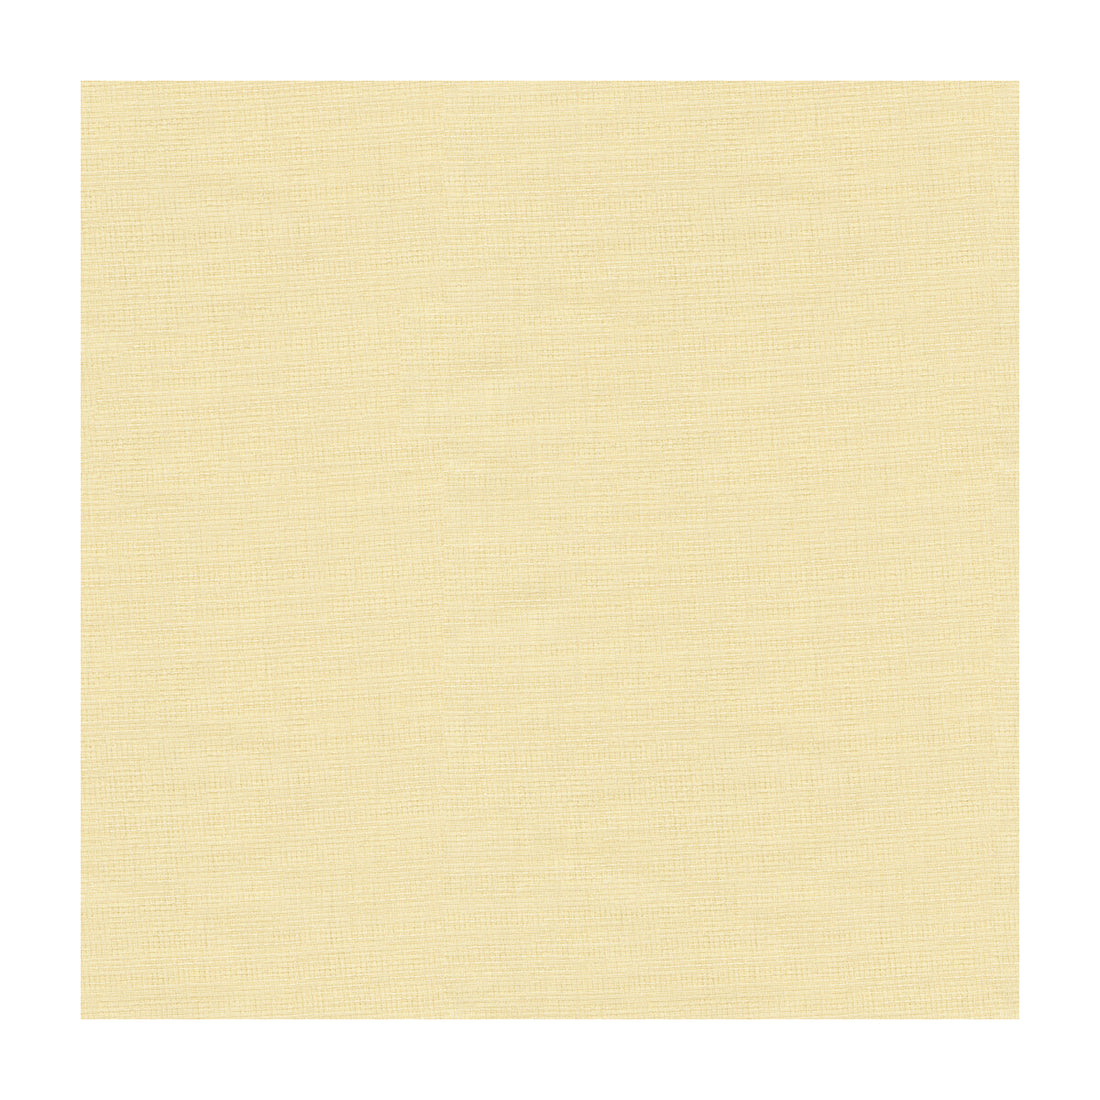 Kravet Contract fabric in 4164-1 color - pattern 4164.1.0 - by Kravet Contract